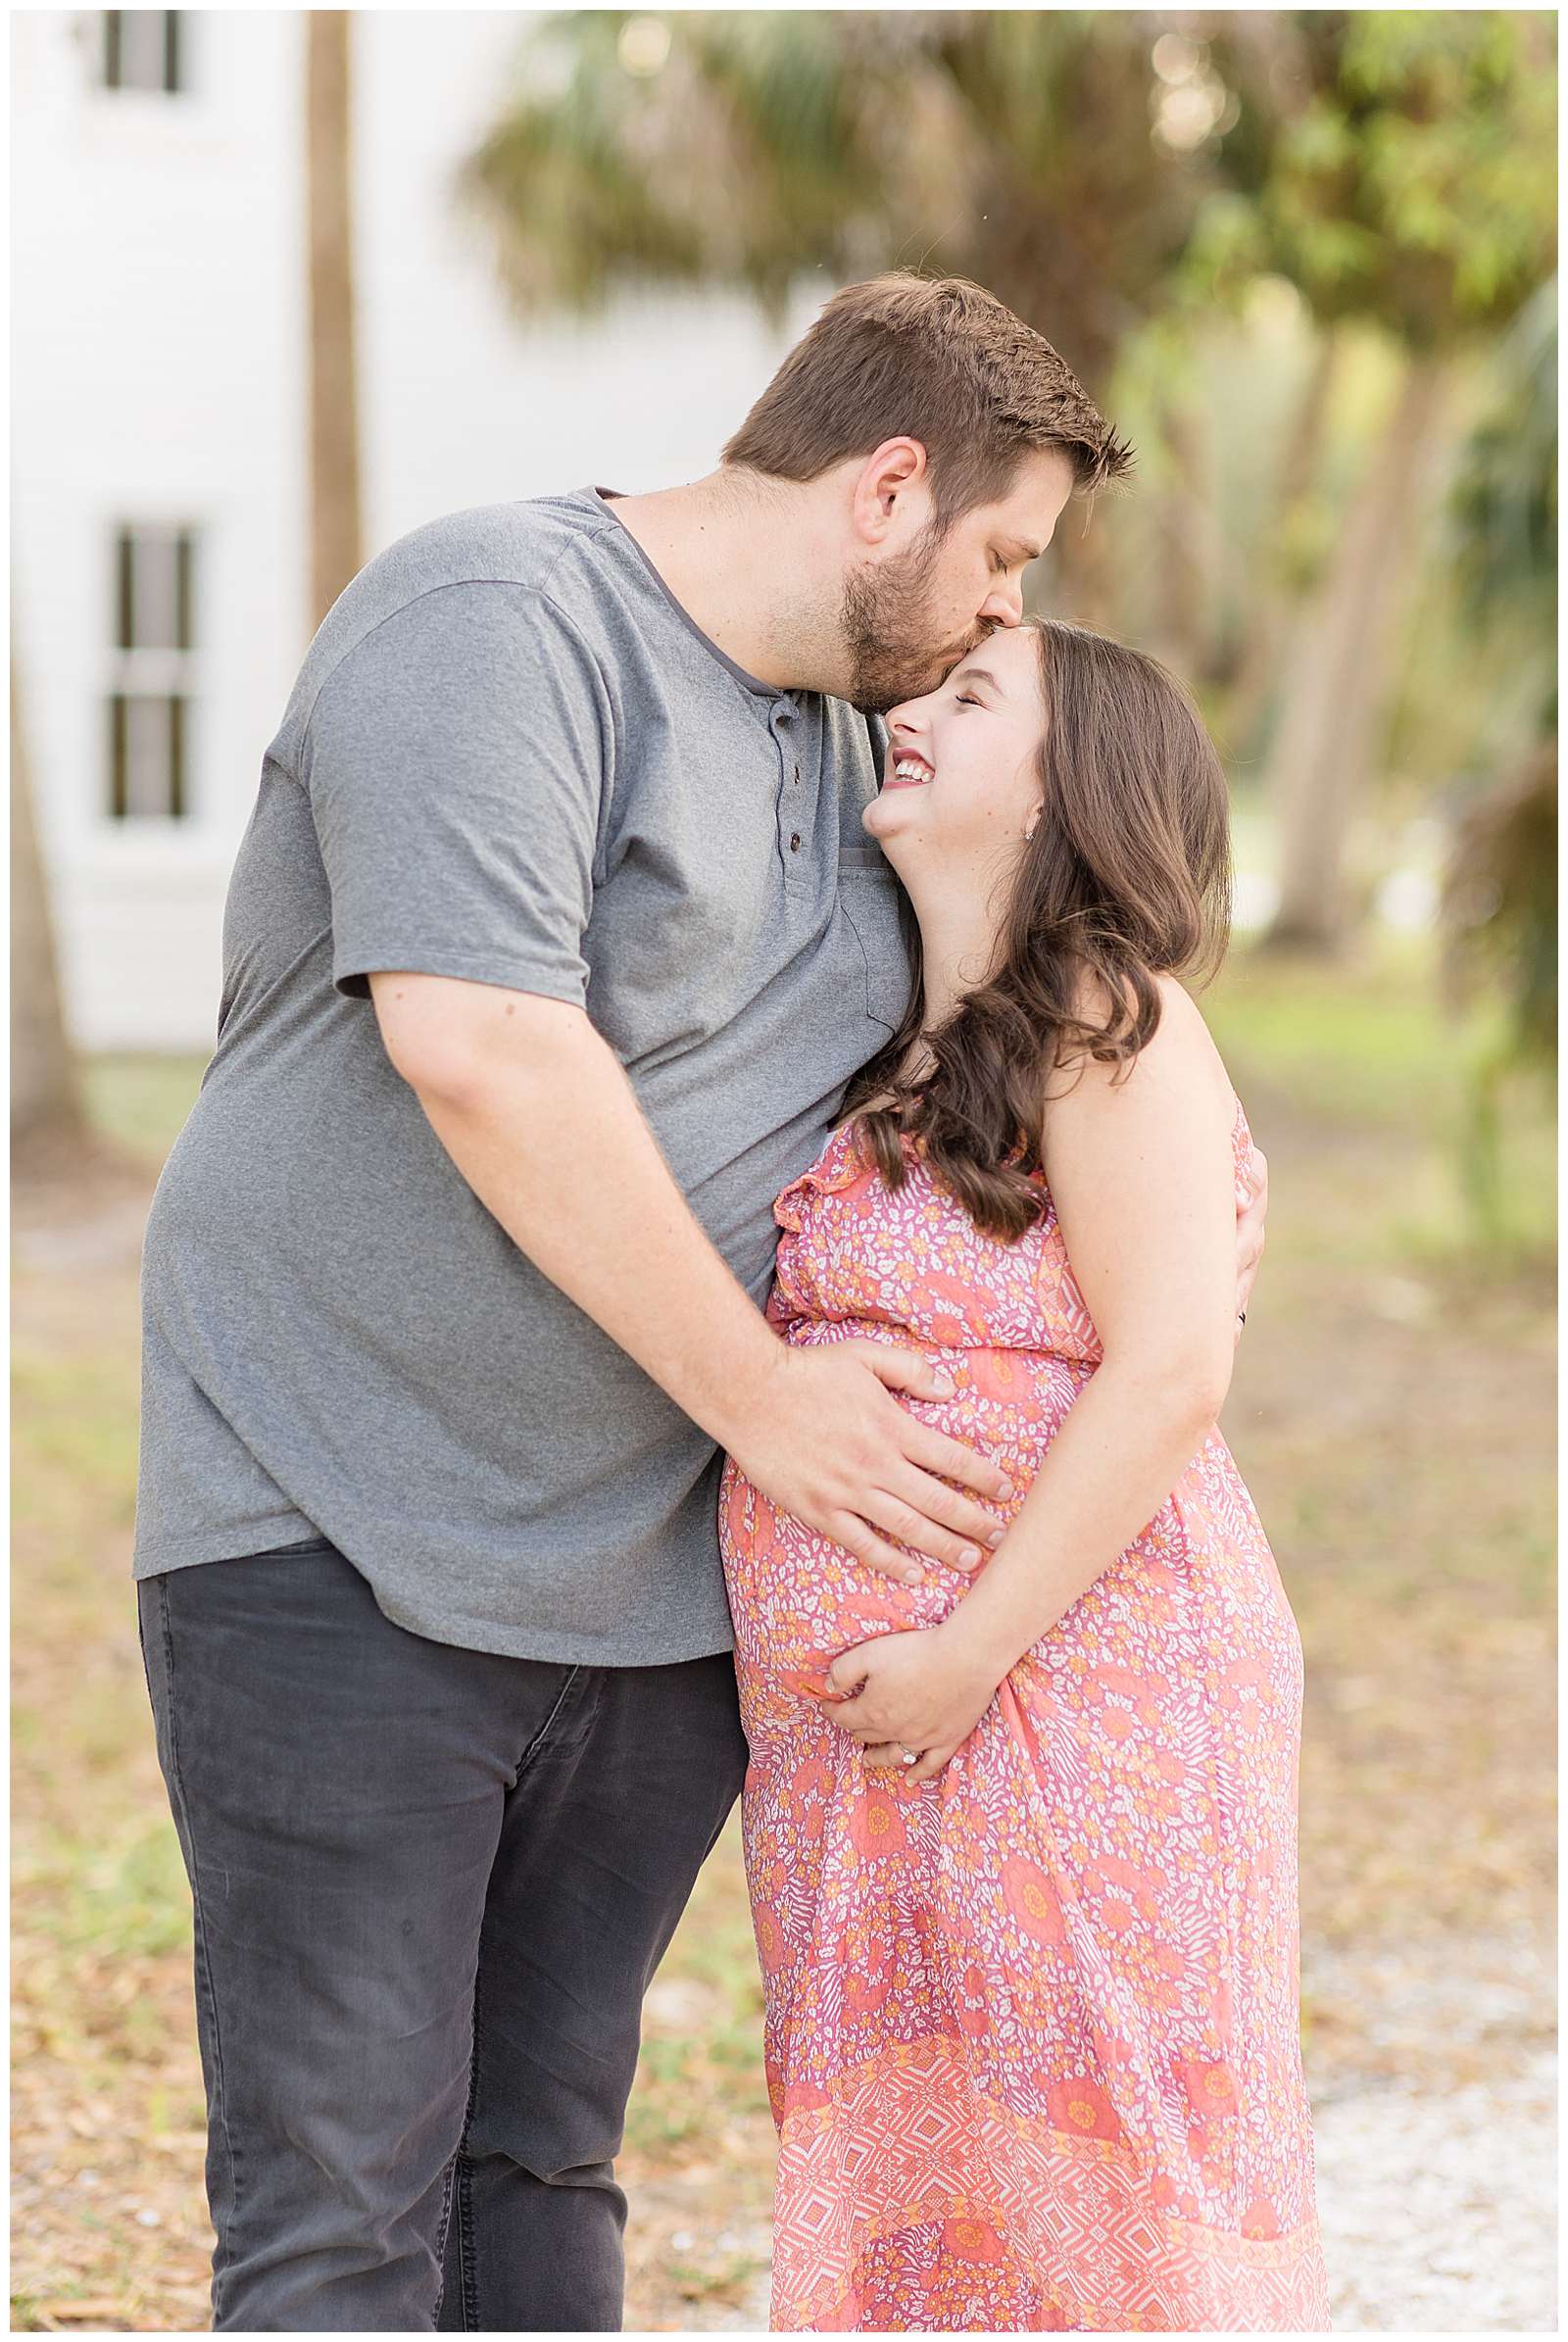 The sweetest couple with the biggest height difference share a laugh during their Florida maternity session with Rebecca Rice Photography.  Husband leans down to kiss his wife on her forehead and she looks up with her eyes closed laughing.